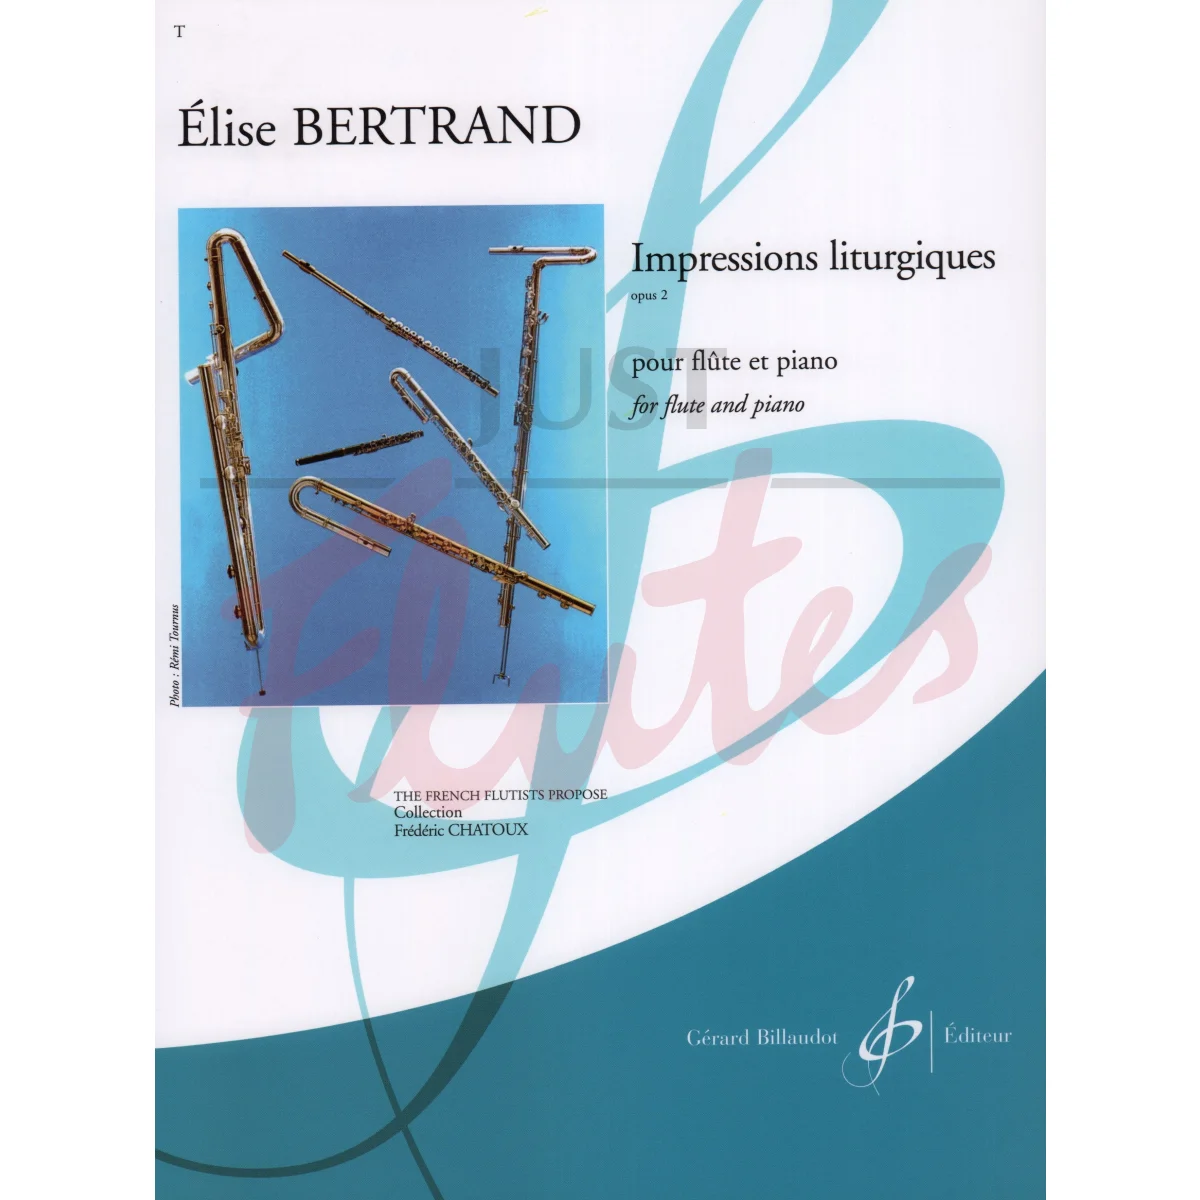 Impressions Liturgiques for Flute and Piano